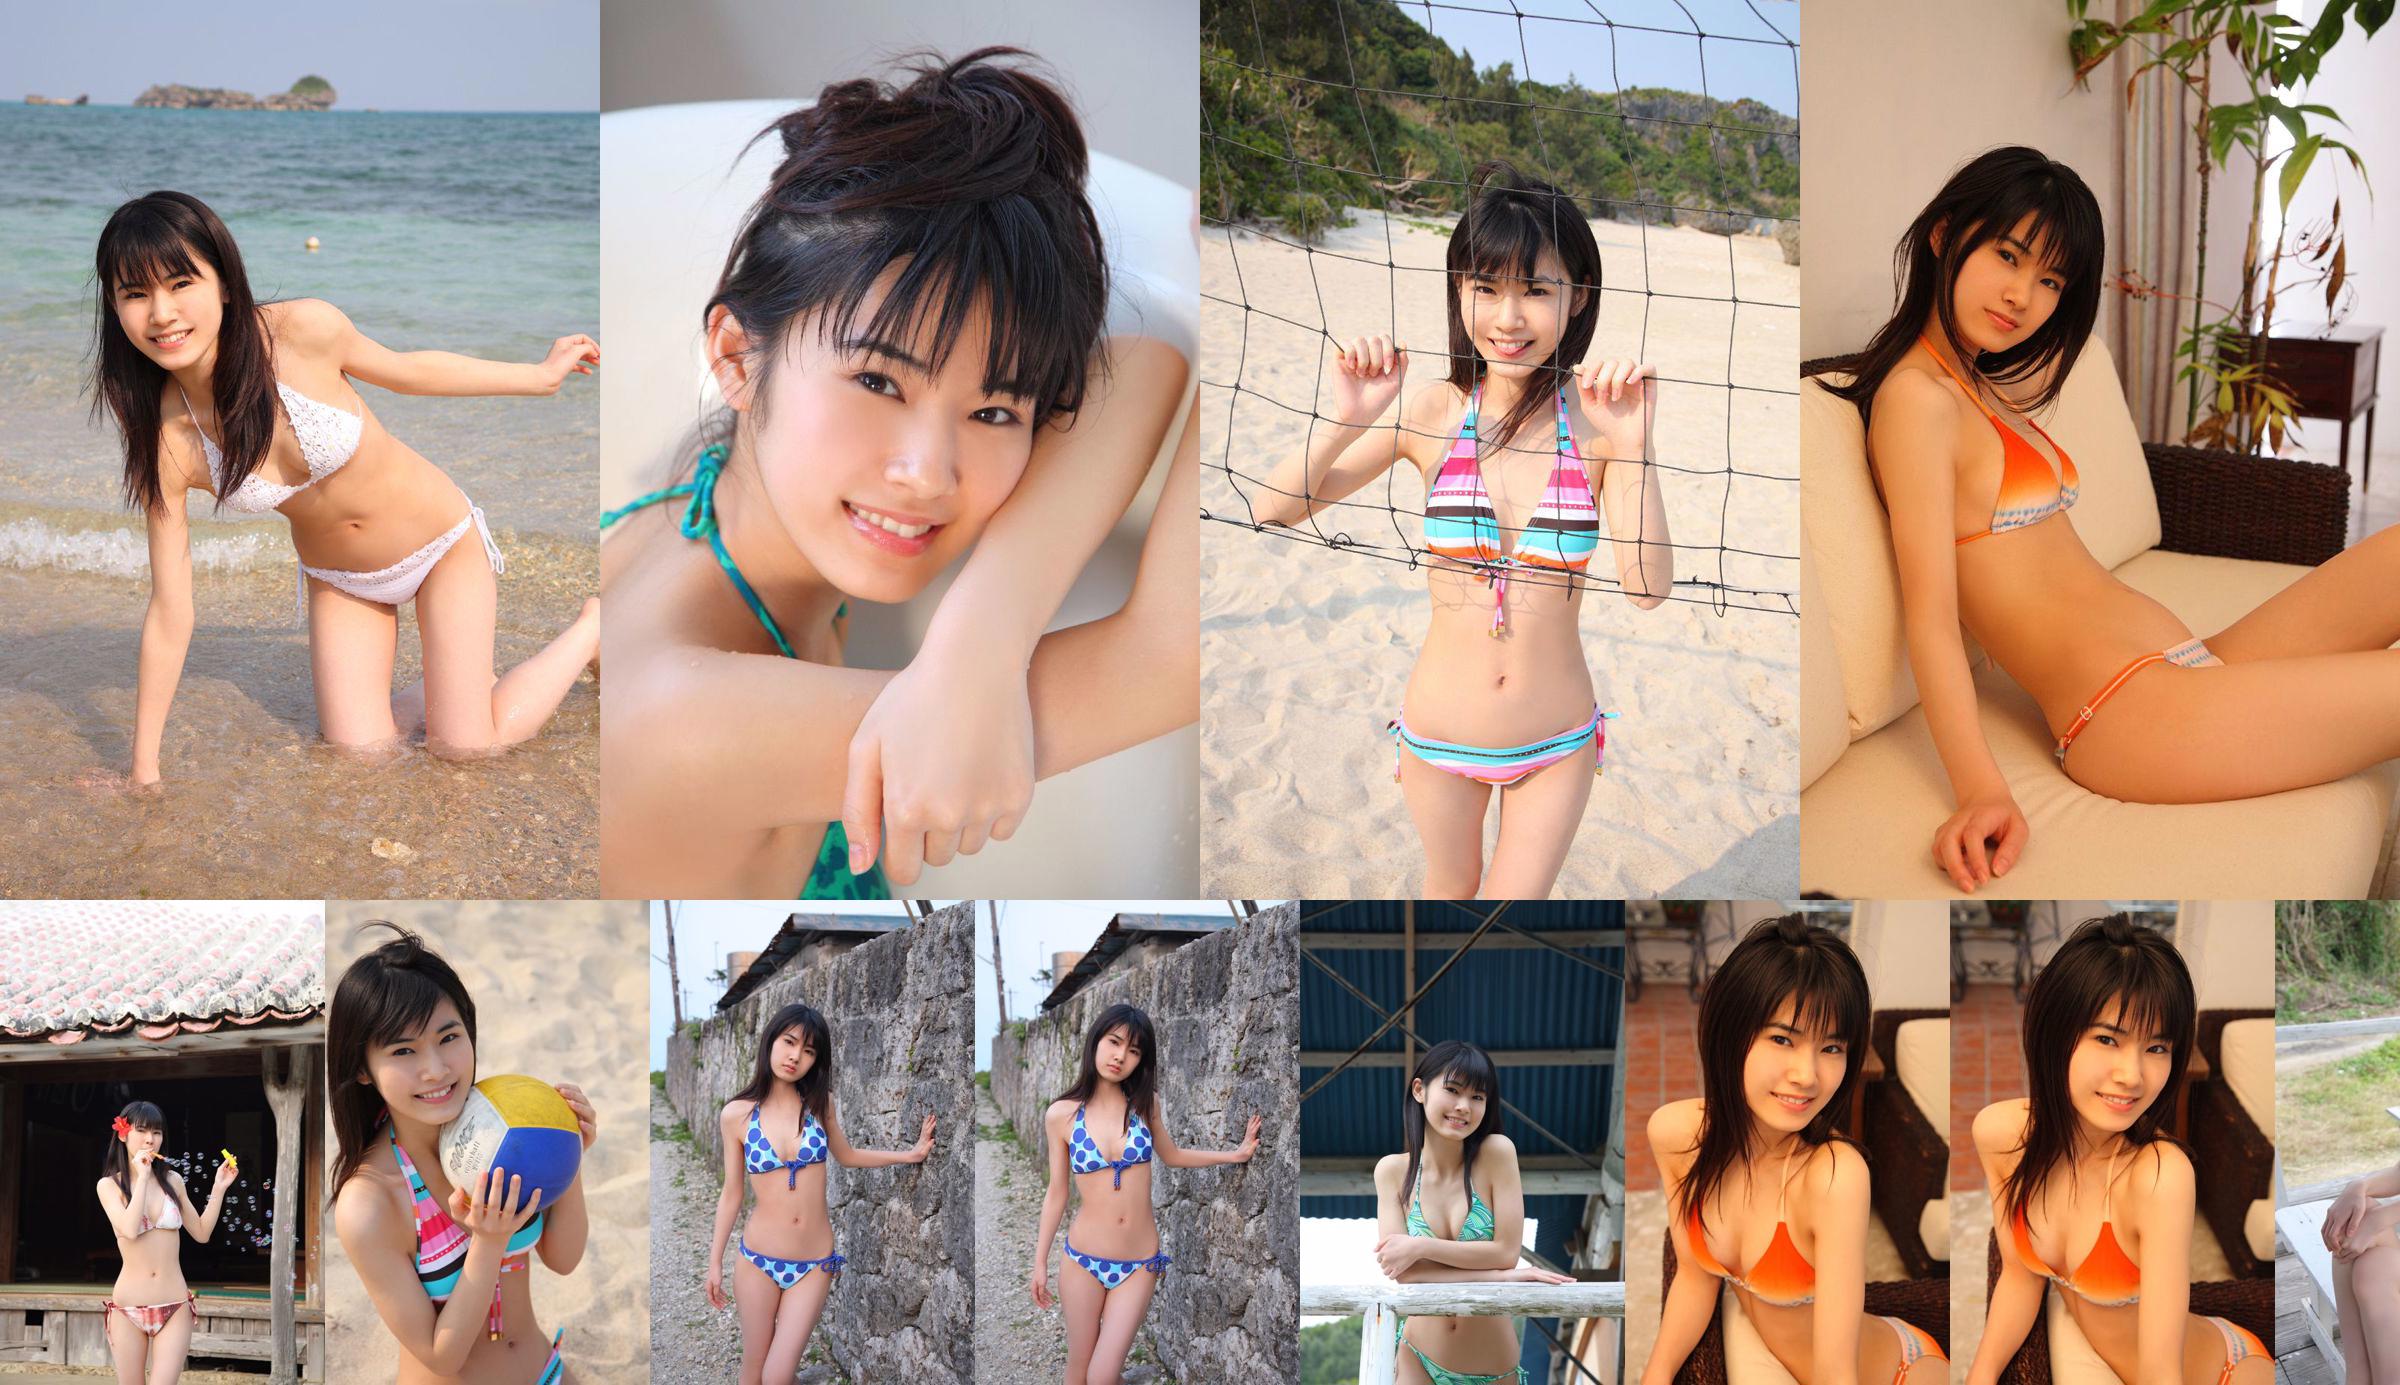 Mai Iwata "My ☆ Remembrance Day" [For-side] No.72b583 Pagina 1